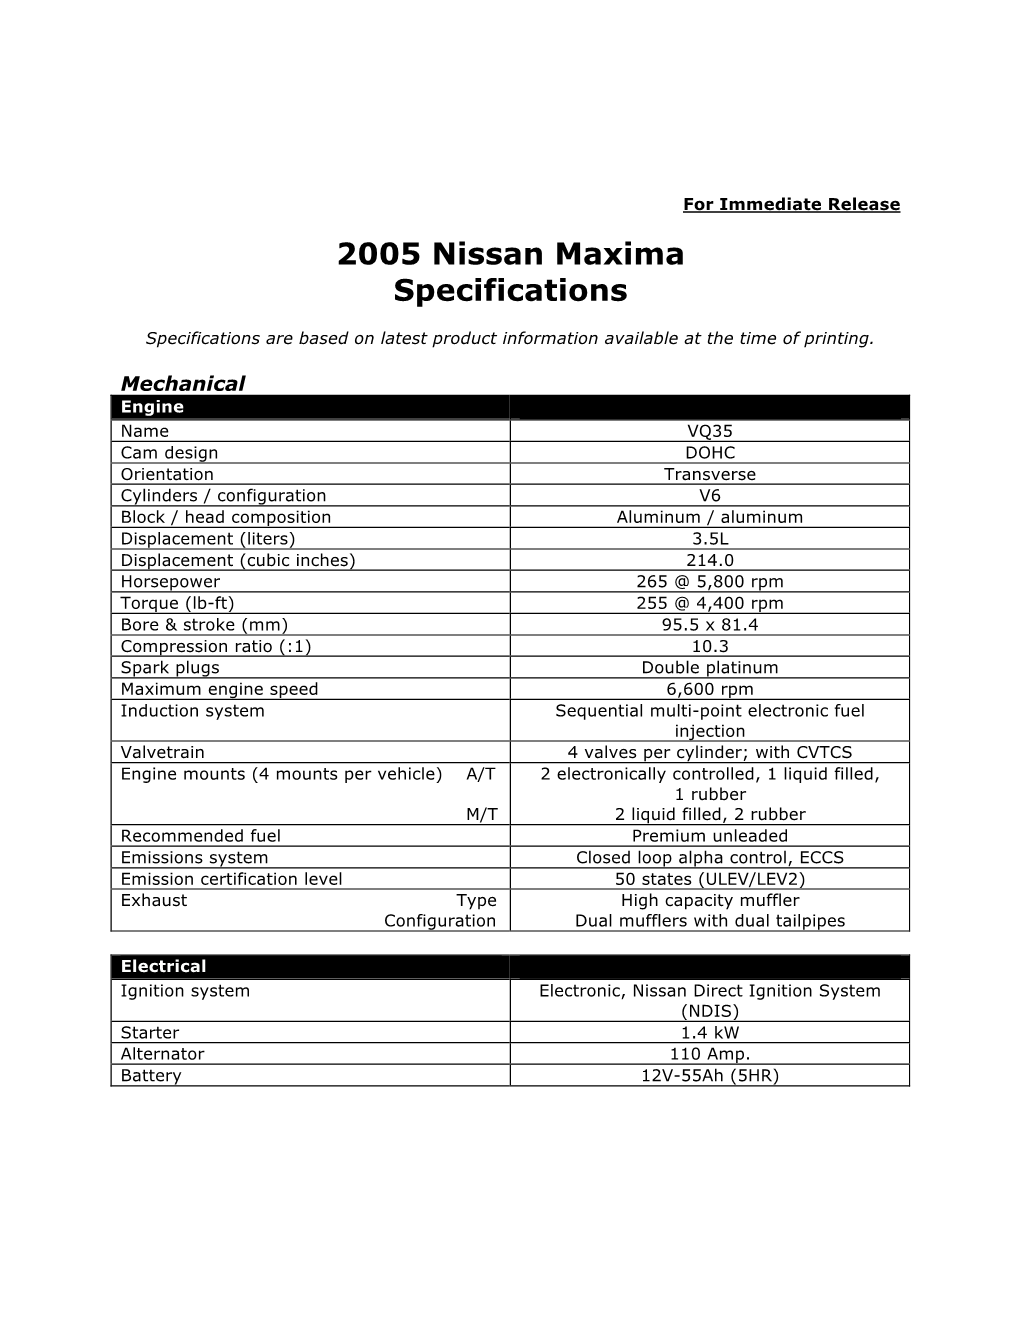 2005 Nissan Maxima Specifications